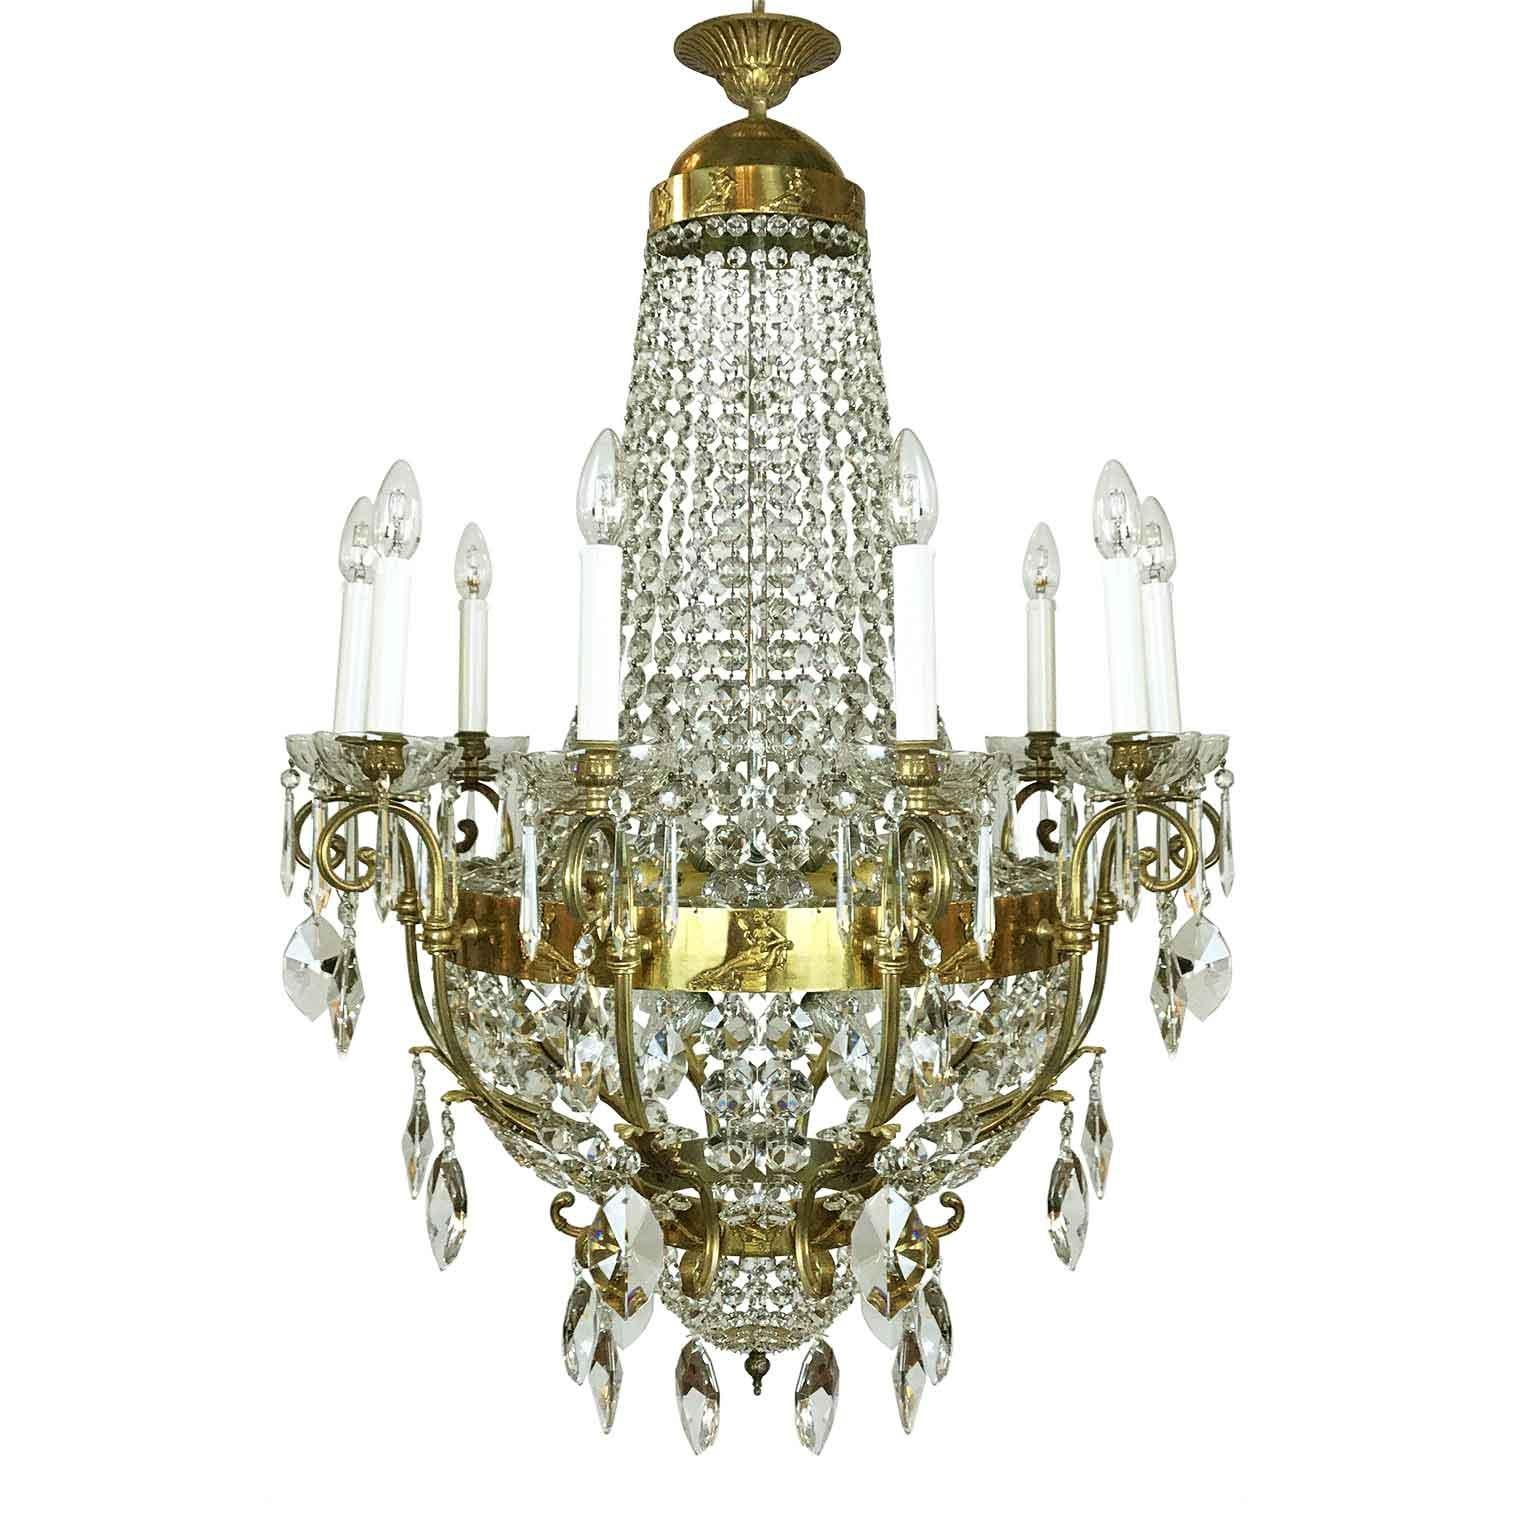 20th Century Italian Neoclassical Style Crystal Chandelier Roman Female Figures For Sale 10